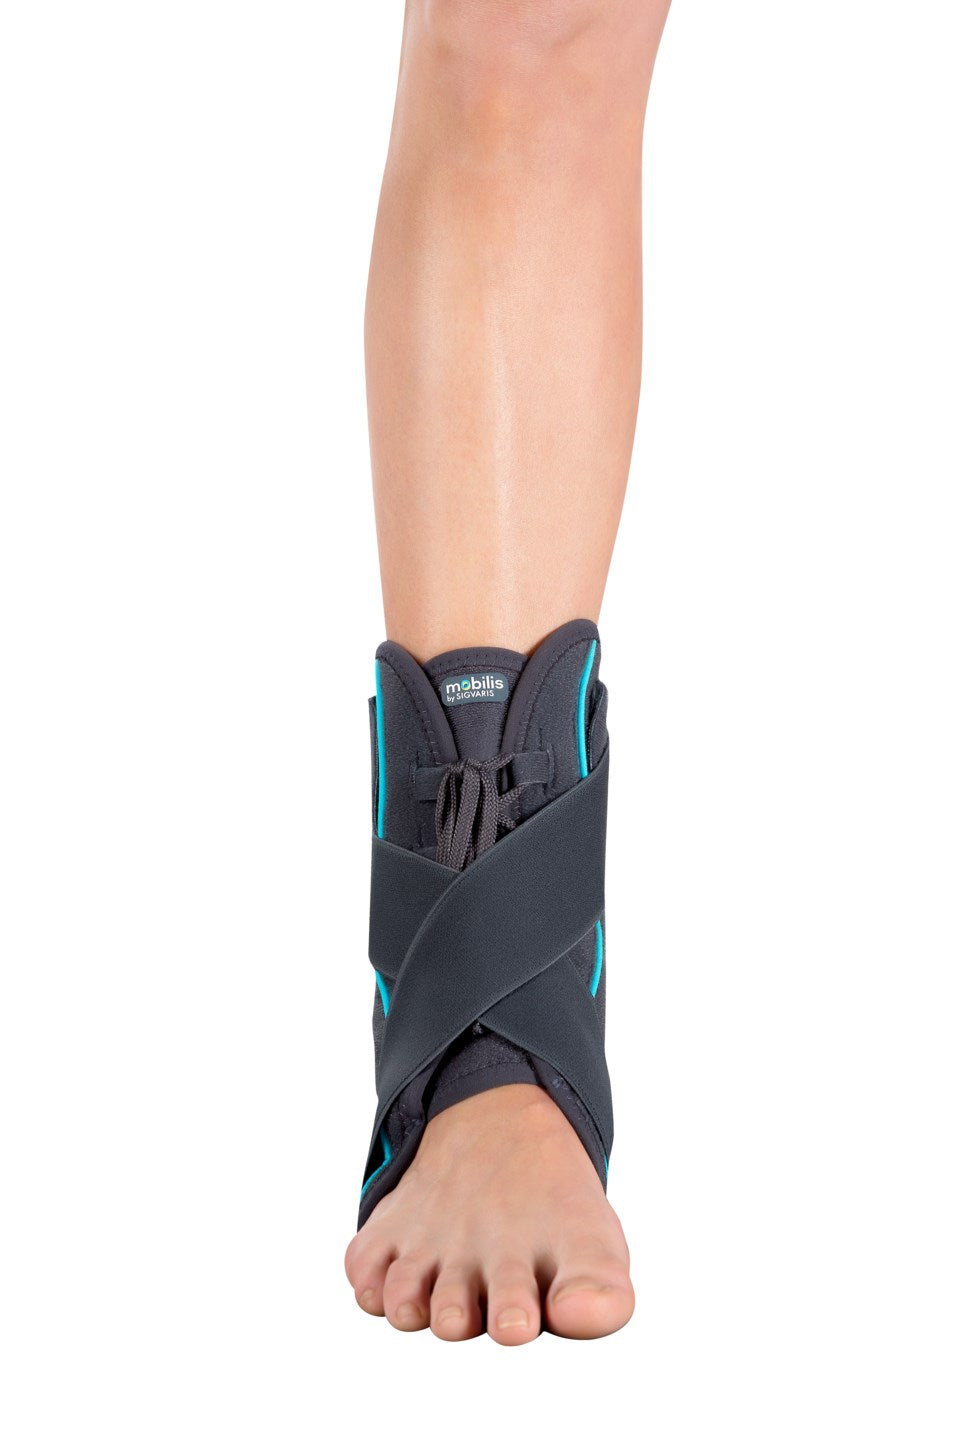 Sigvaris MOBILIS MalleoSupport Ankle